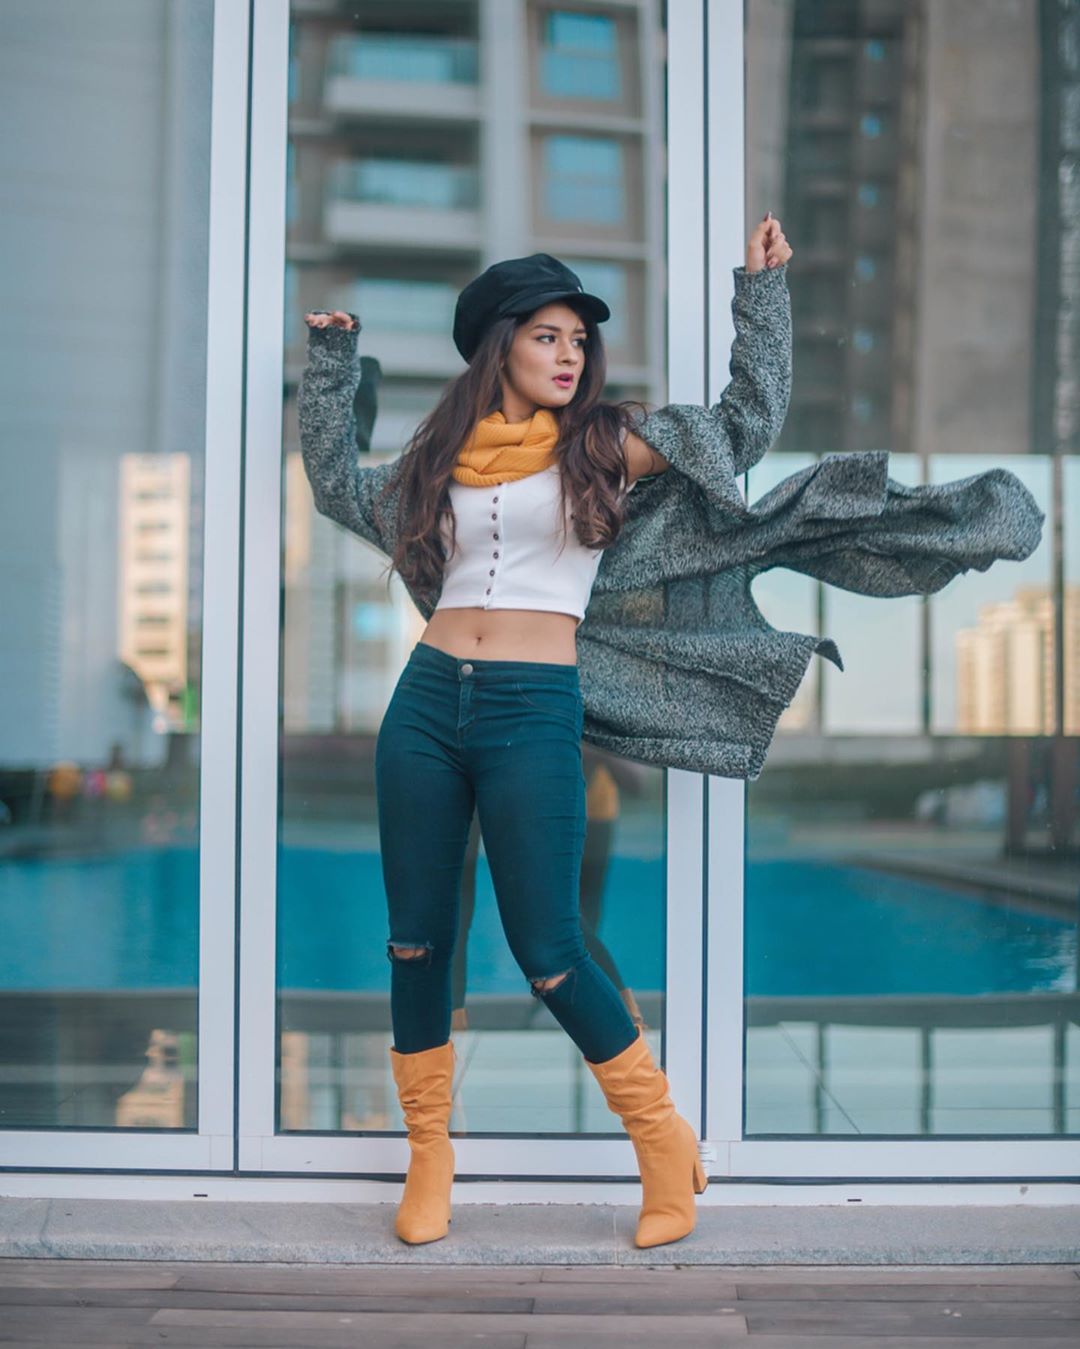 Avneet Kaur Wallpapers, Photos, Images & Pictures Pic 1- When you think you’ve been killing it with those poses 
Pic 2 & 3- But your boots make you re